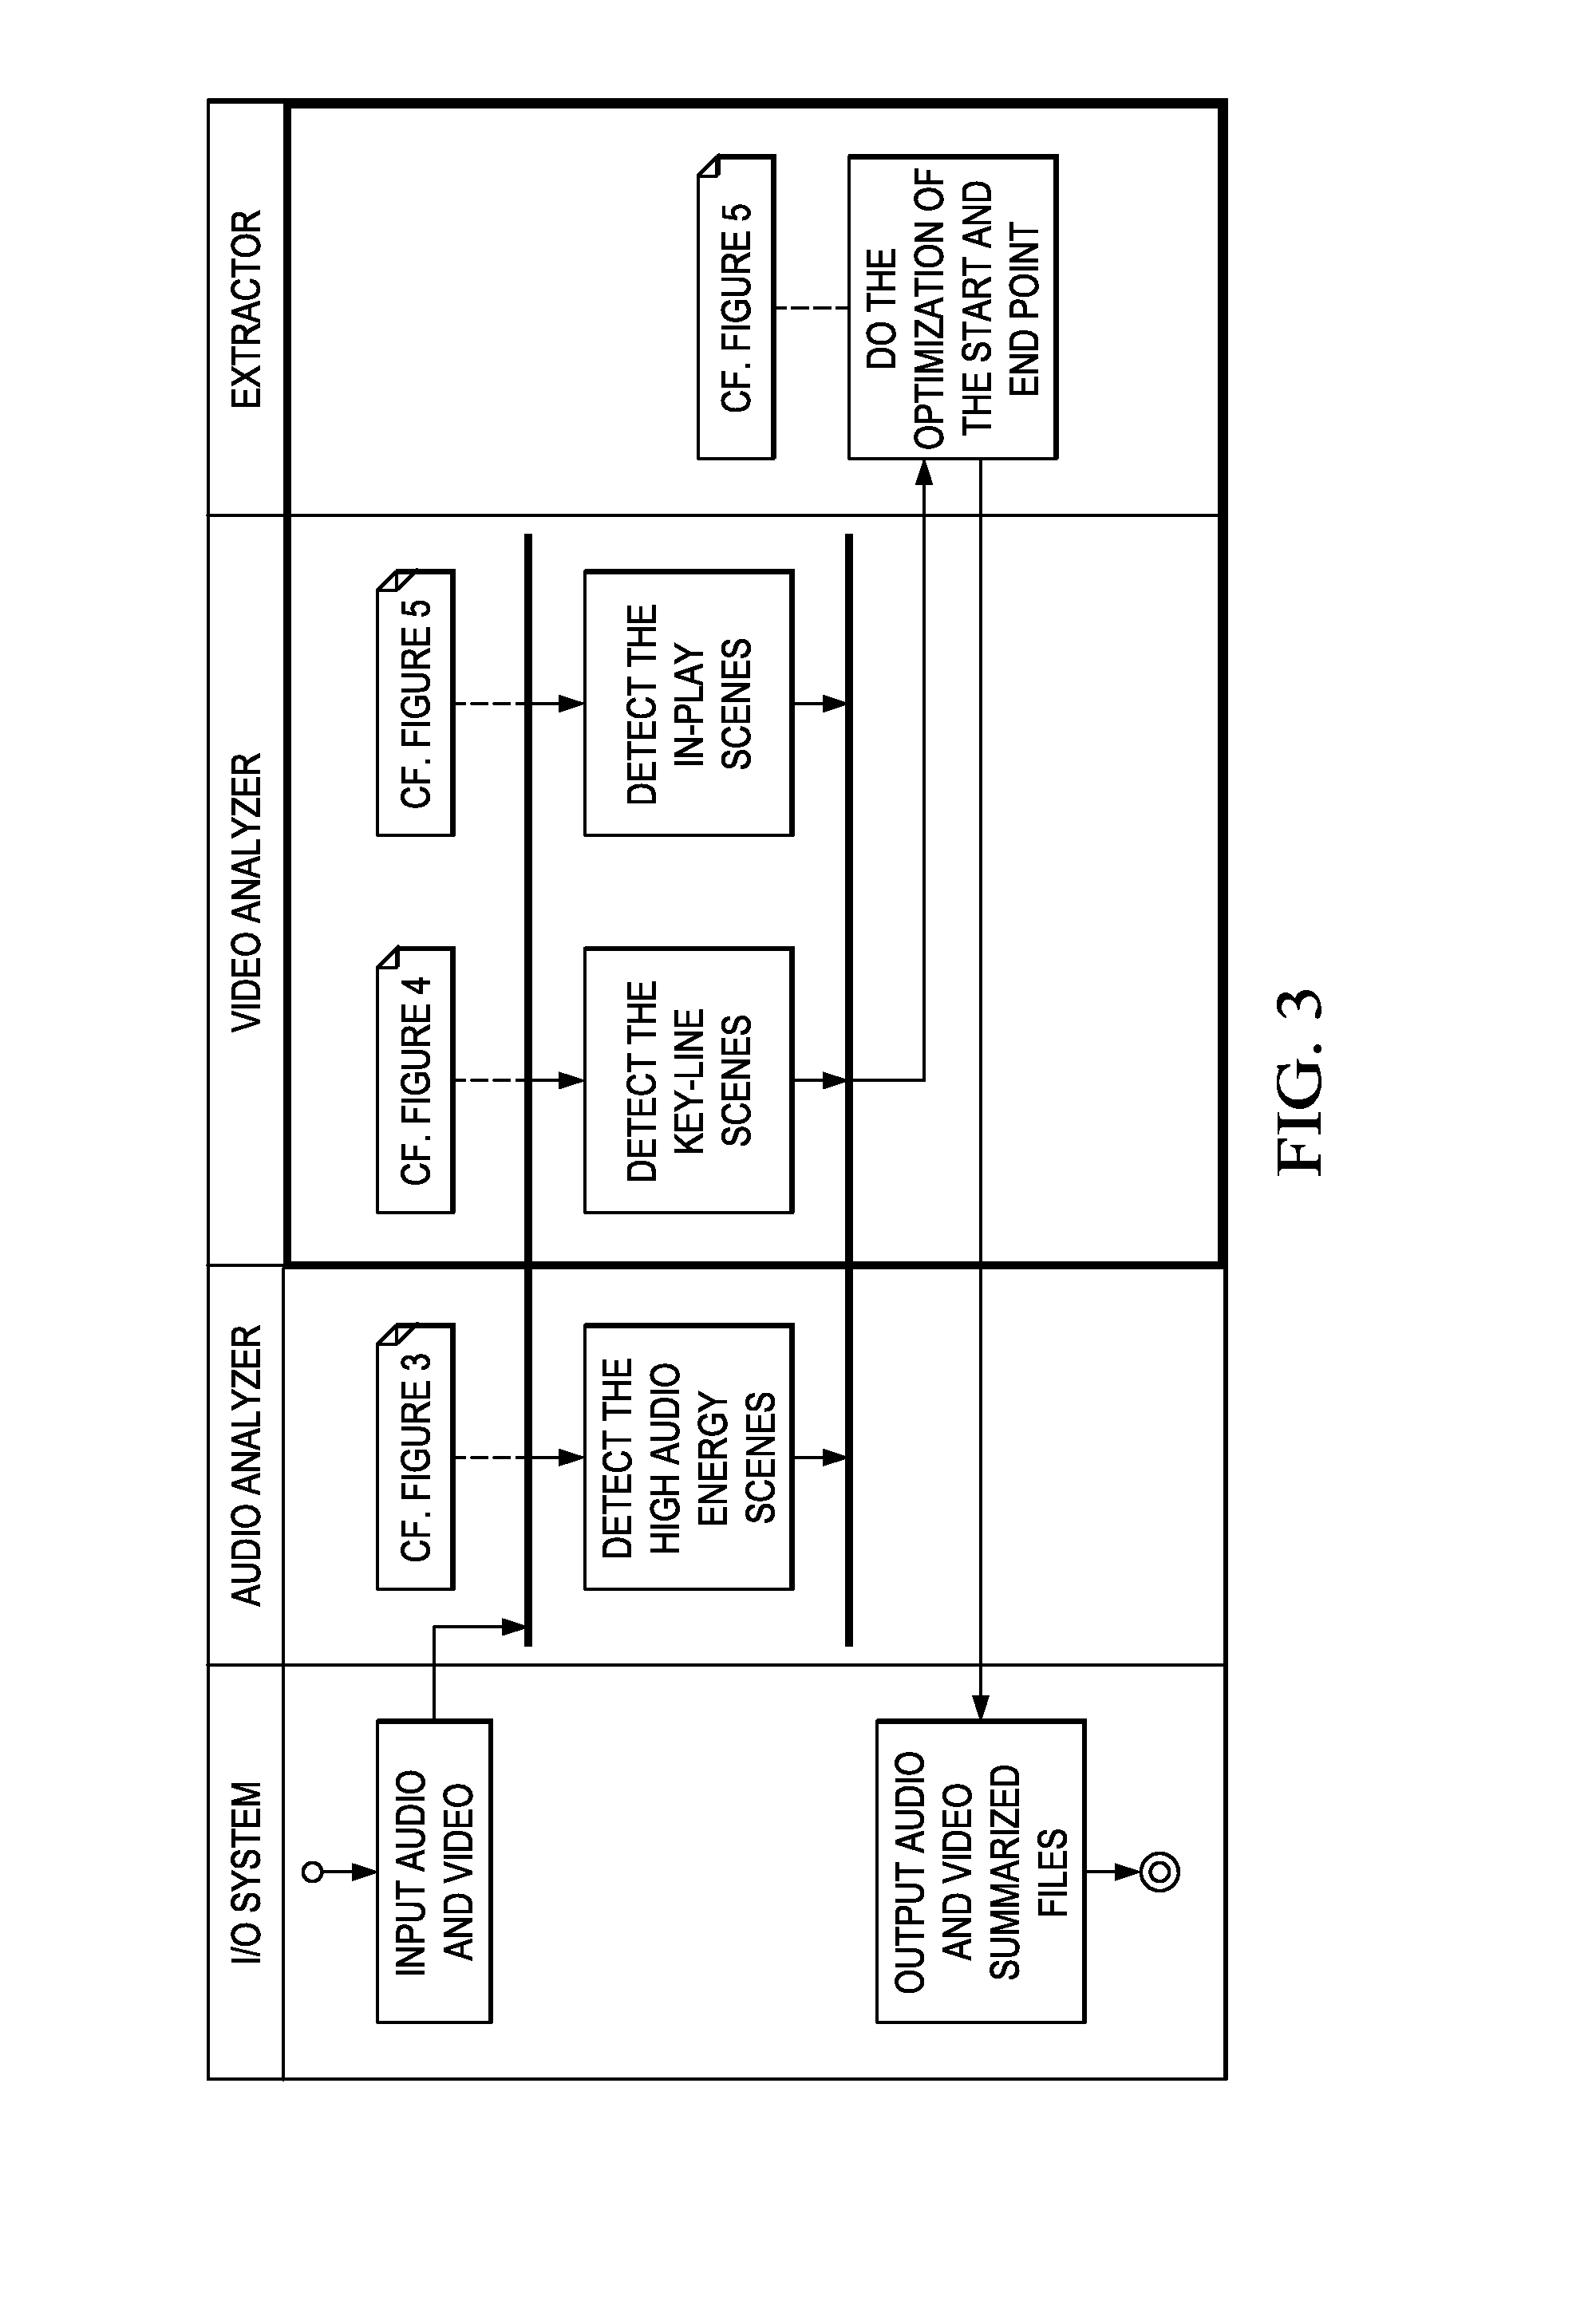 Method and Apparatus for Enhancing Highlight Detection